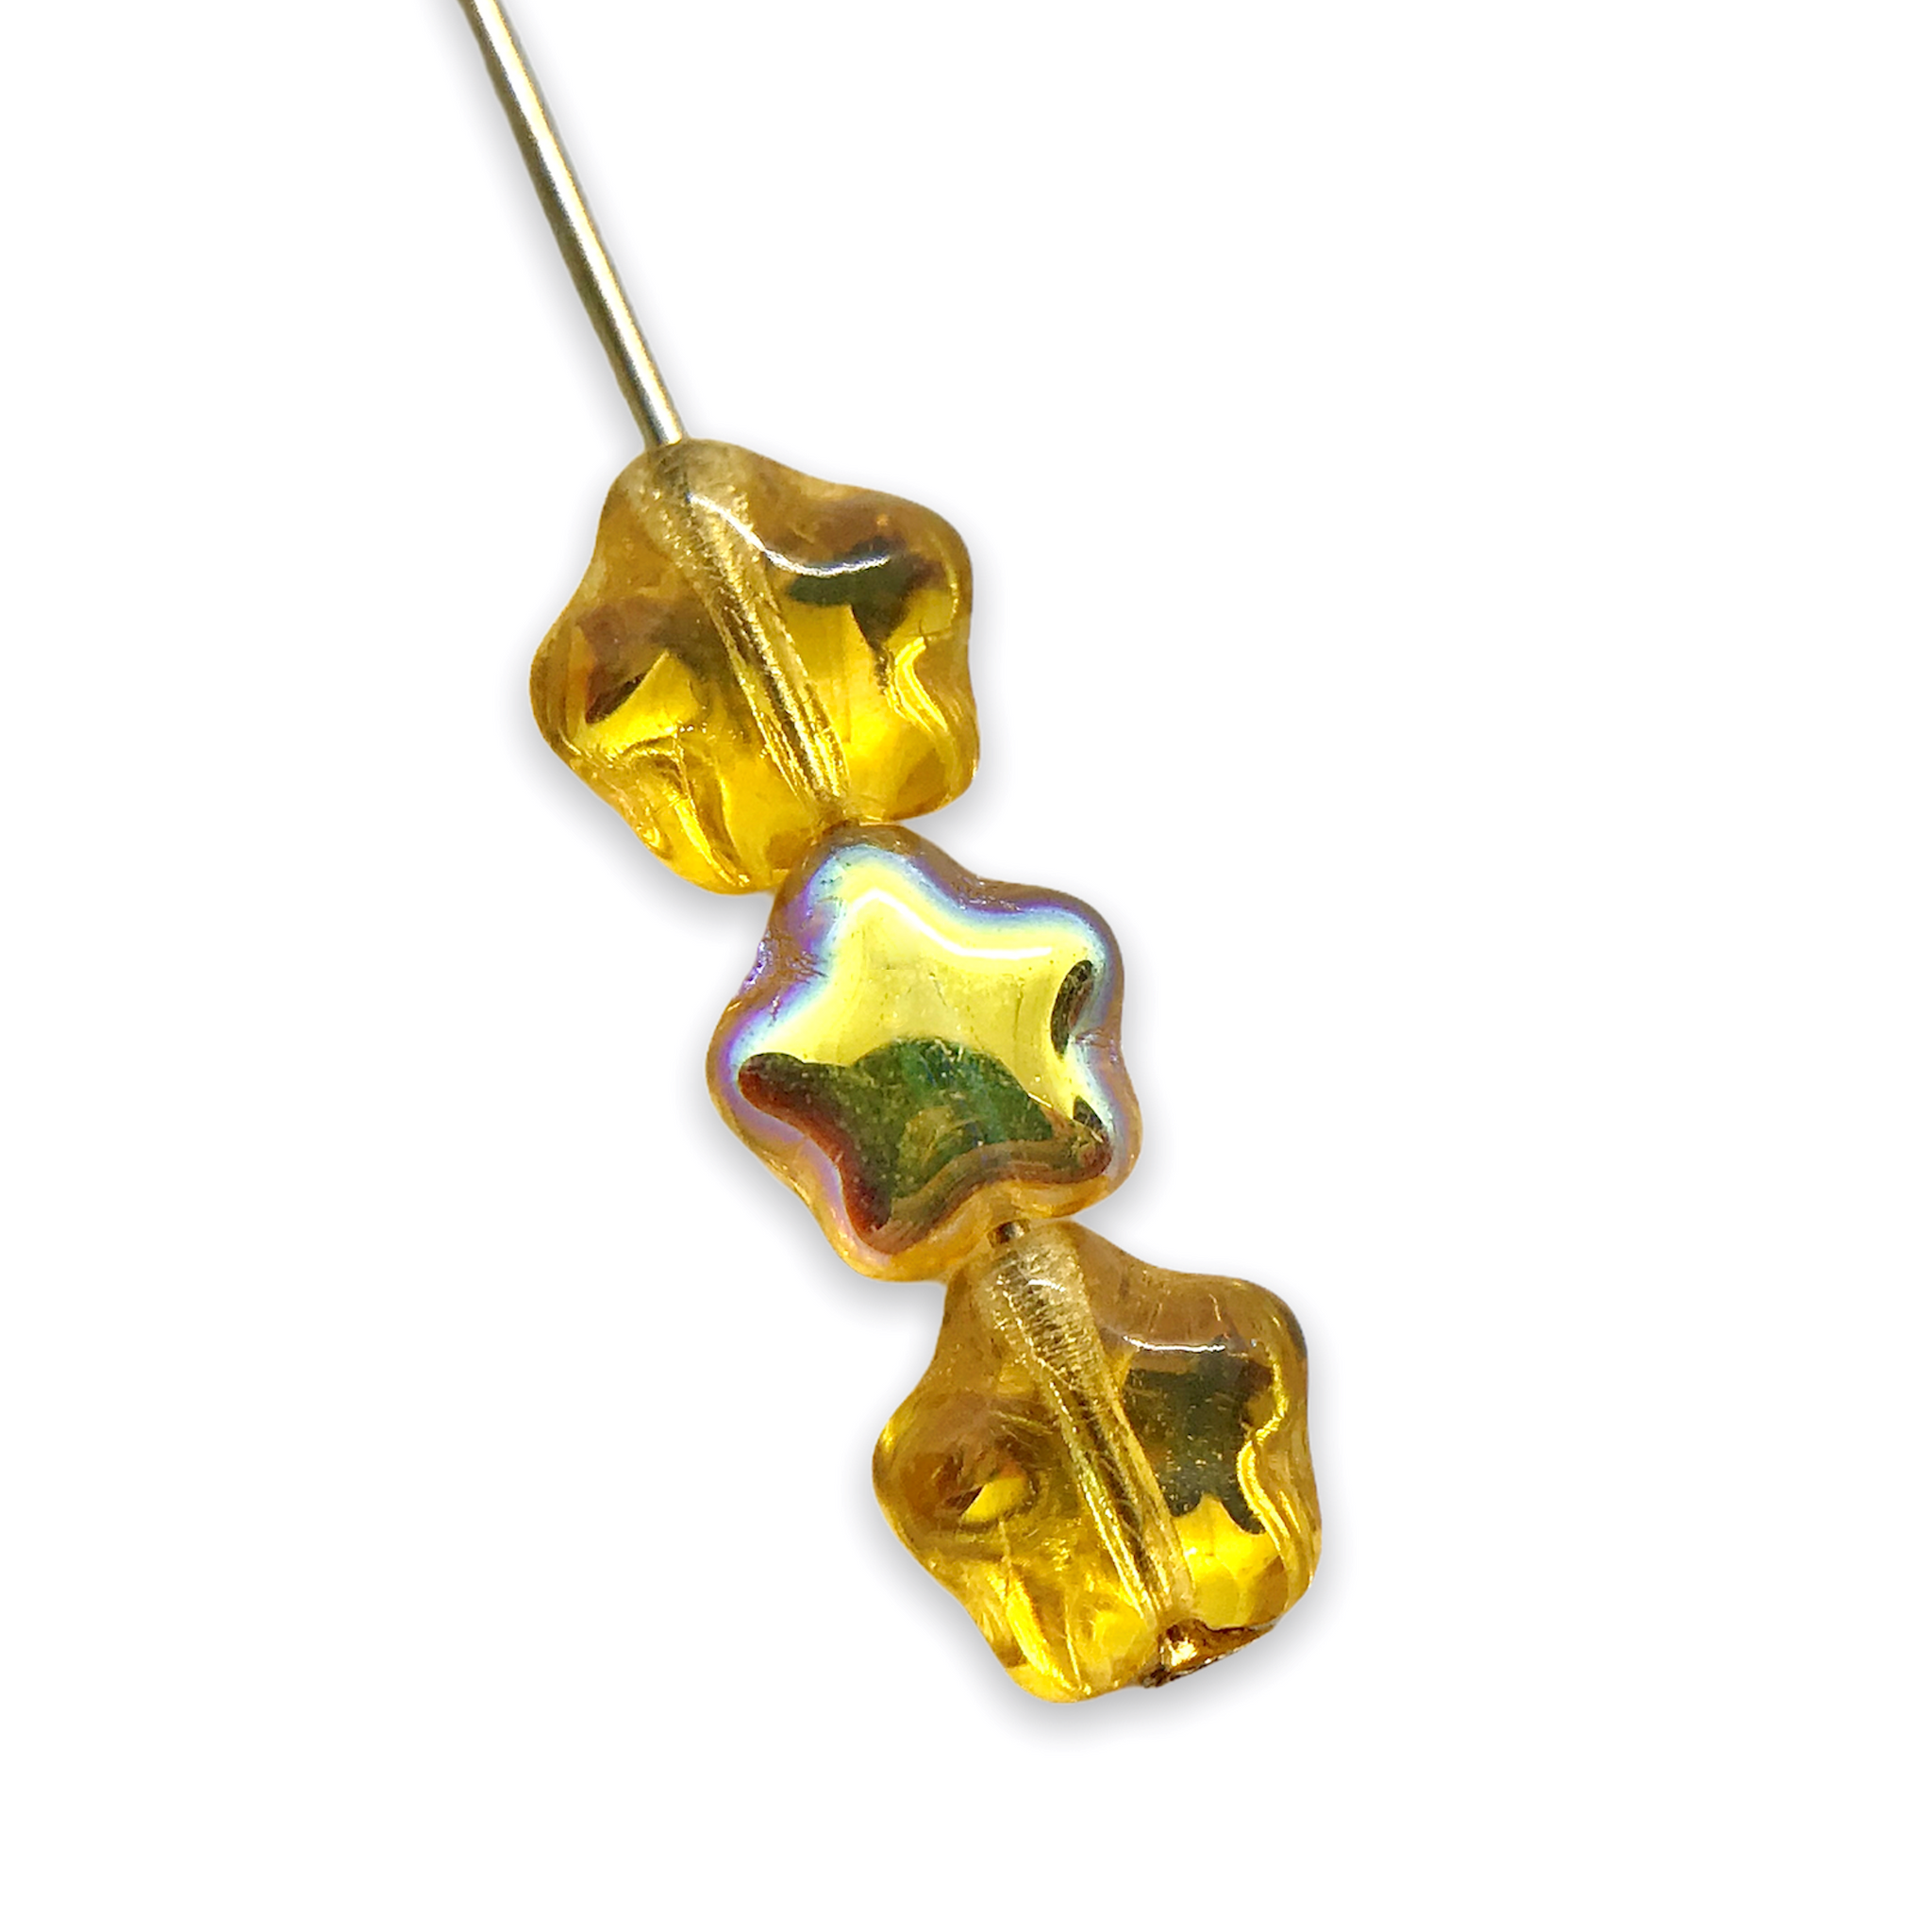 6mm Glass Star Bead Czech Glass Beads Various Colors Available Qty 50 